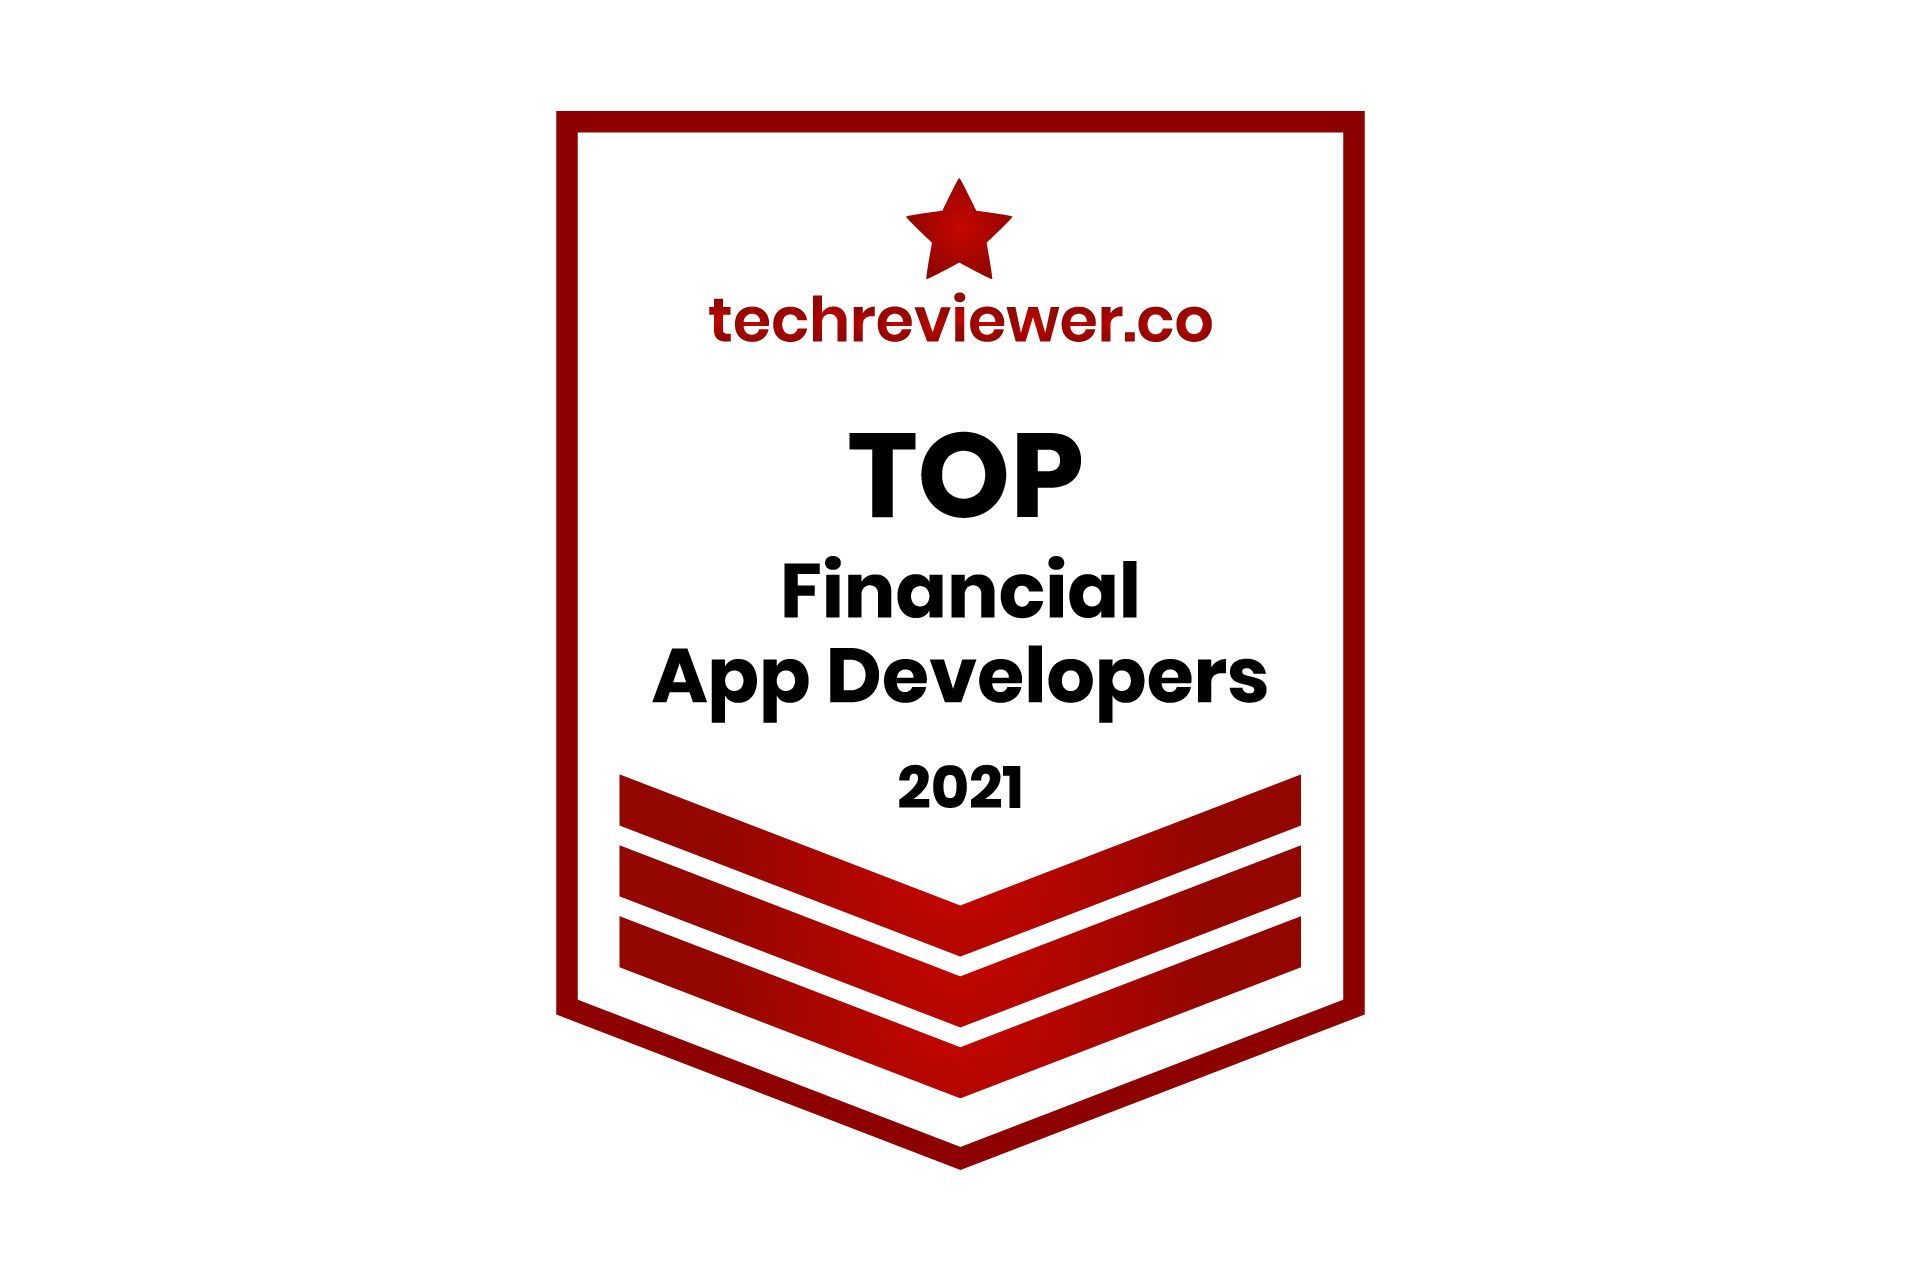 Imaginary Cloud named Top Financial App Developer by Techreviewer